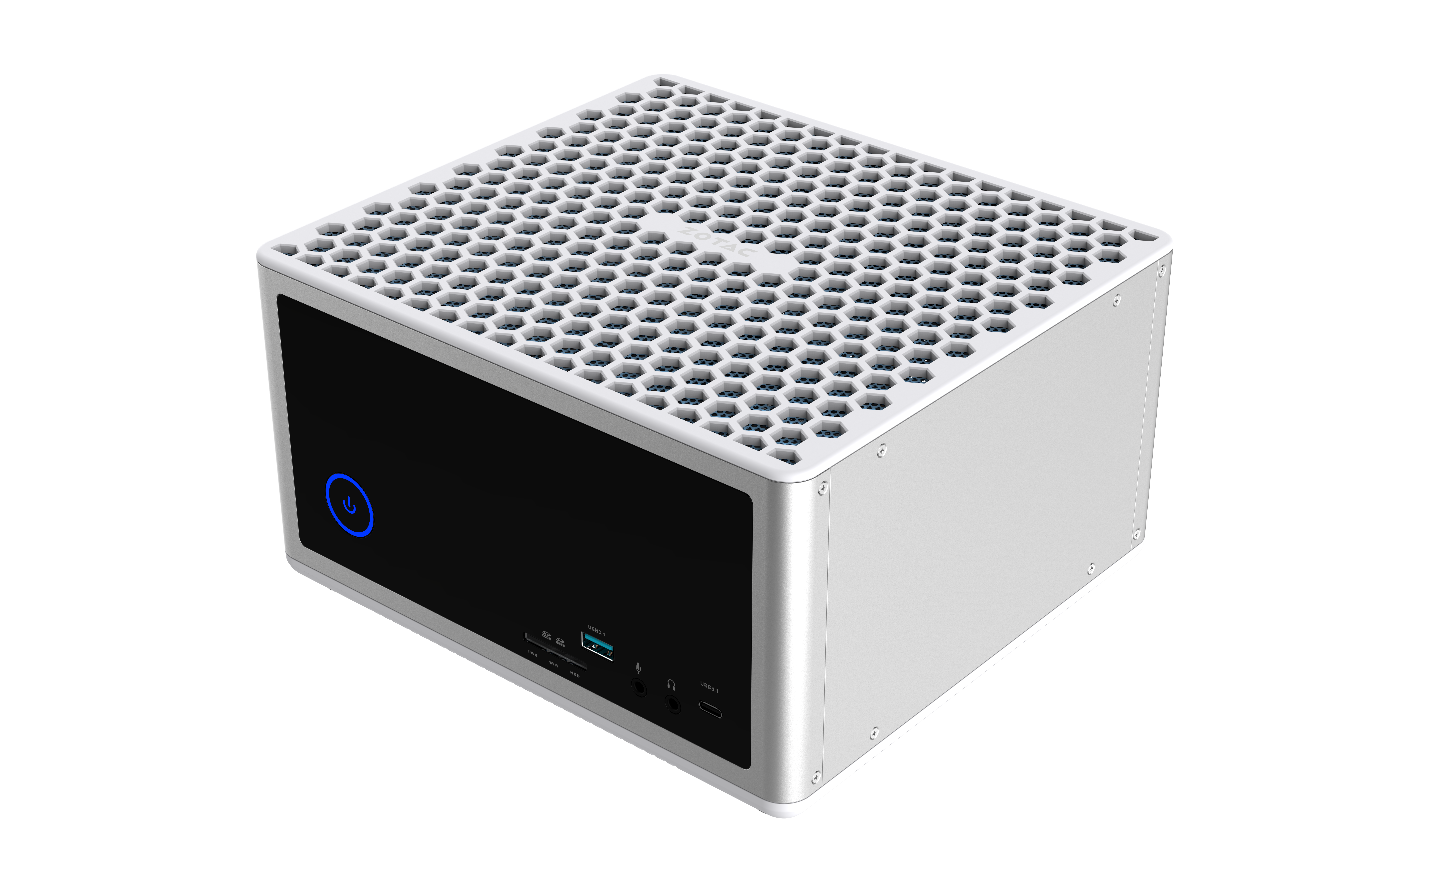 The World's Most Gaming Mini PC, First VR Ready and Liquid Mini PC